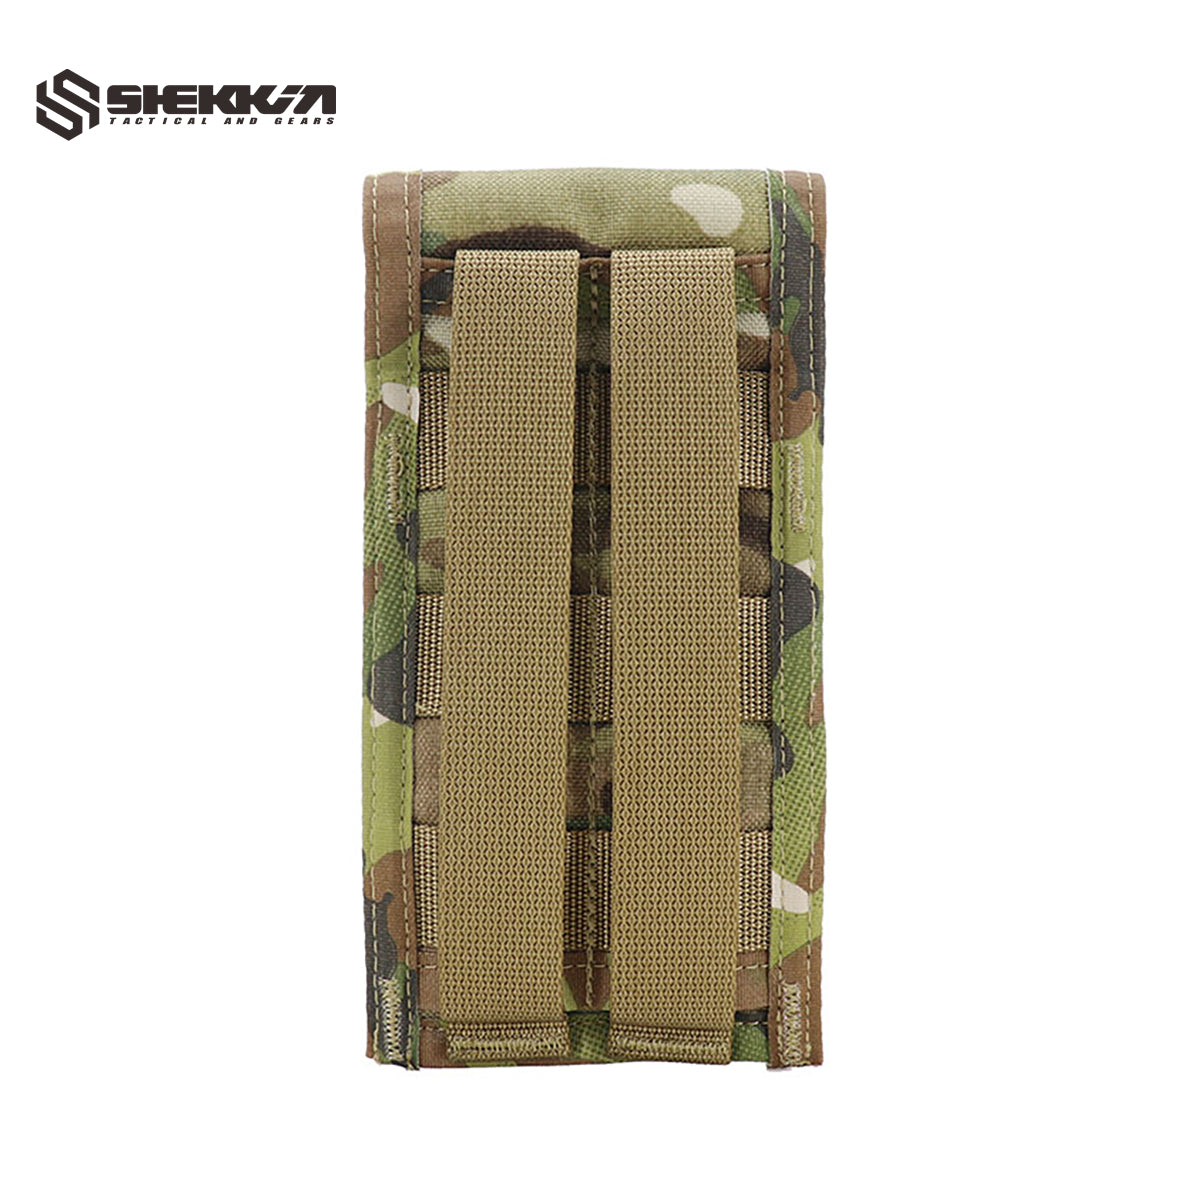 Multicam Paraclete style Tiered M4 Mag Pouch - Shekkin Gears